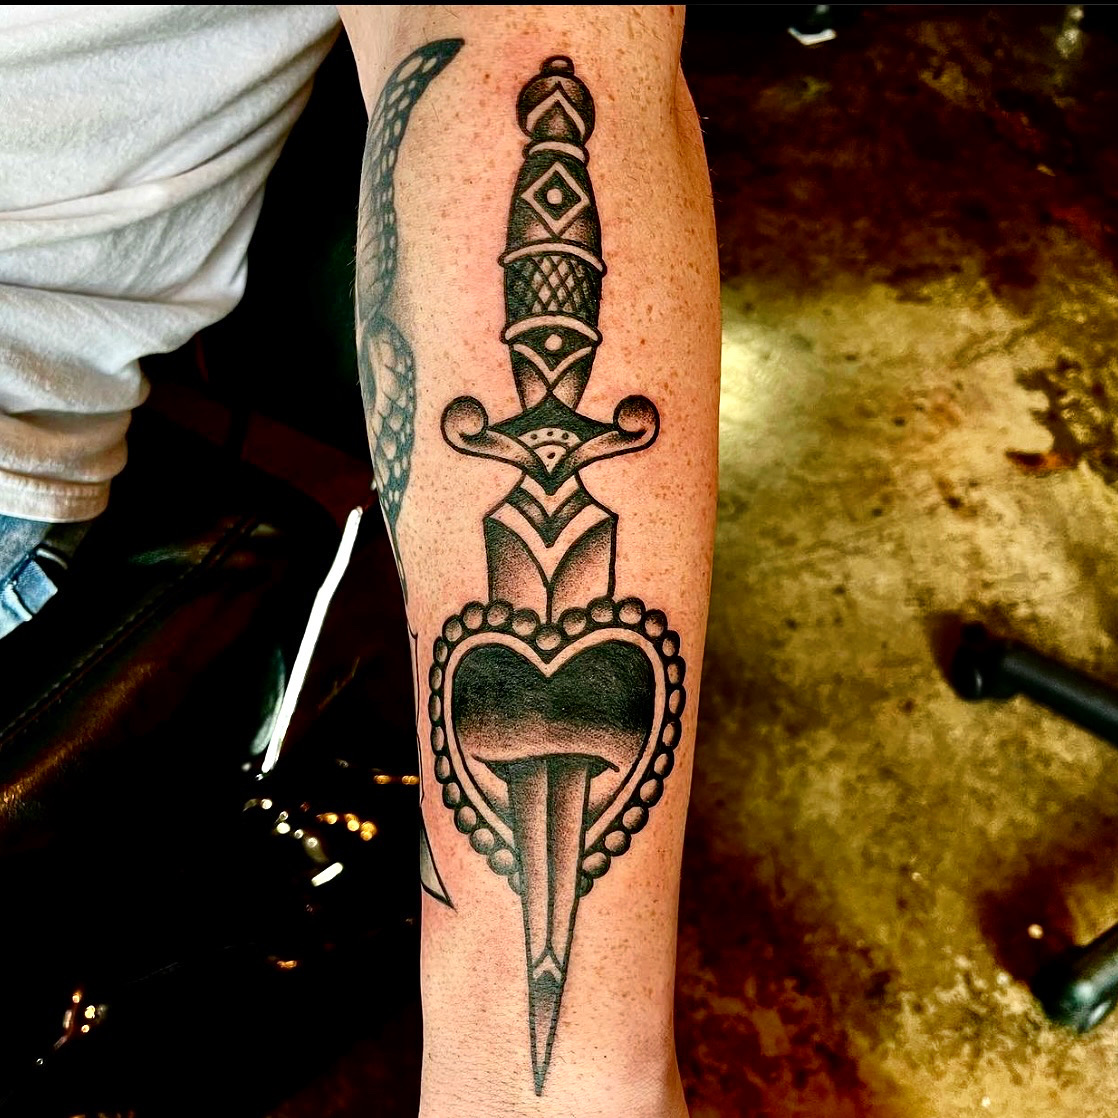 Tattoo of a knife and a heart